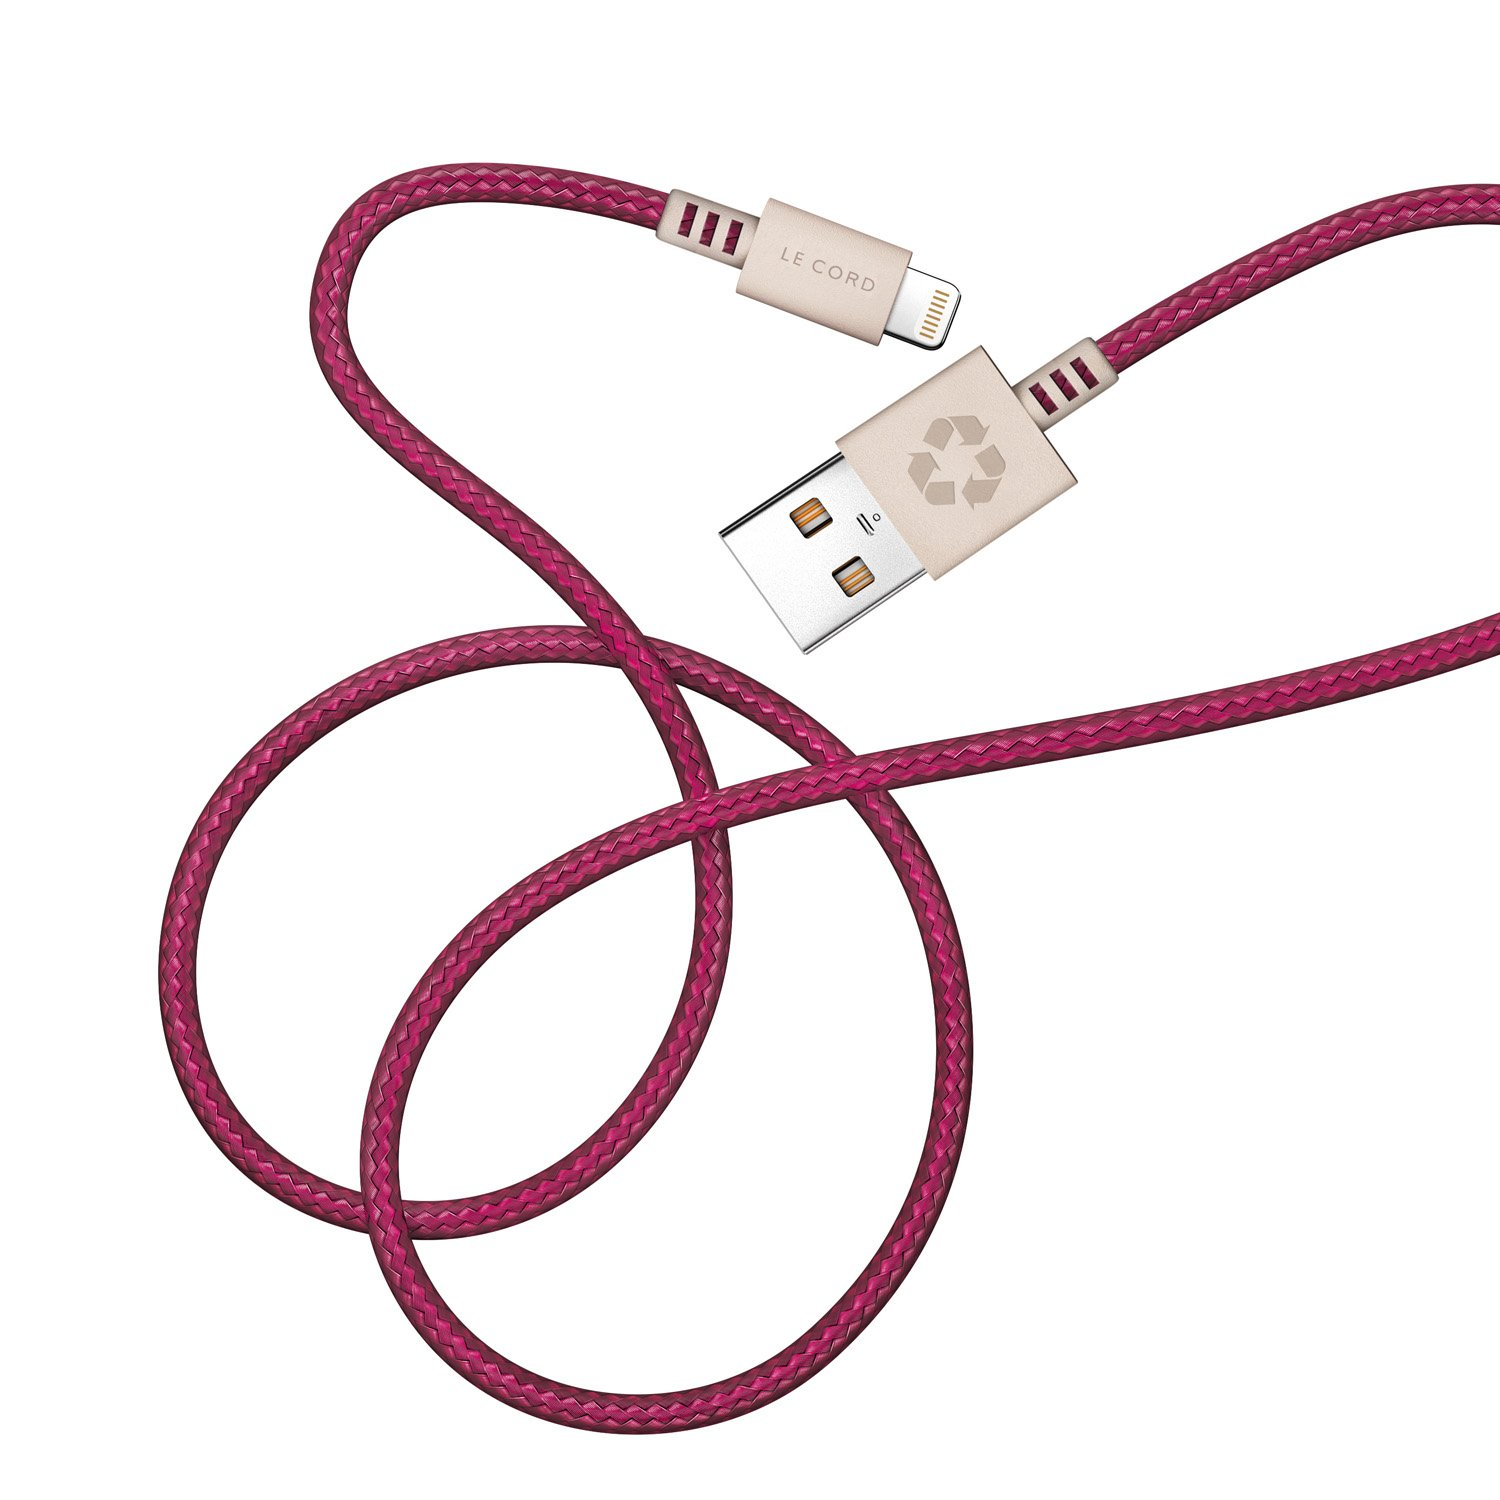 Lightning CORD Kabel recyceltes Plum iPhone LE